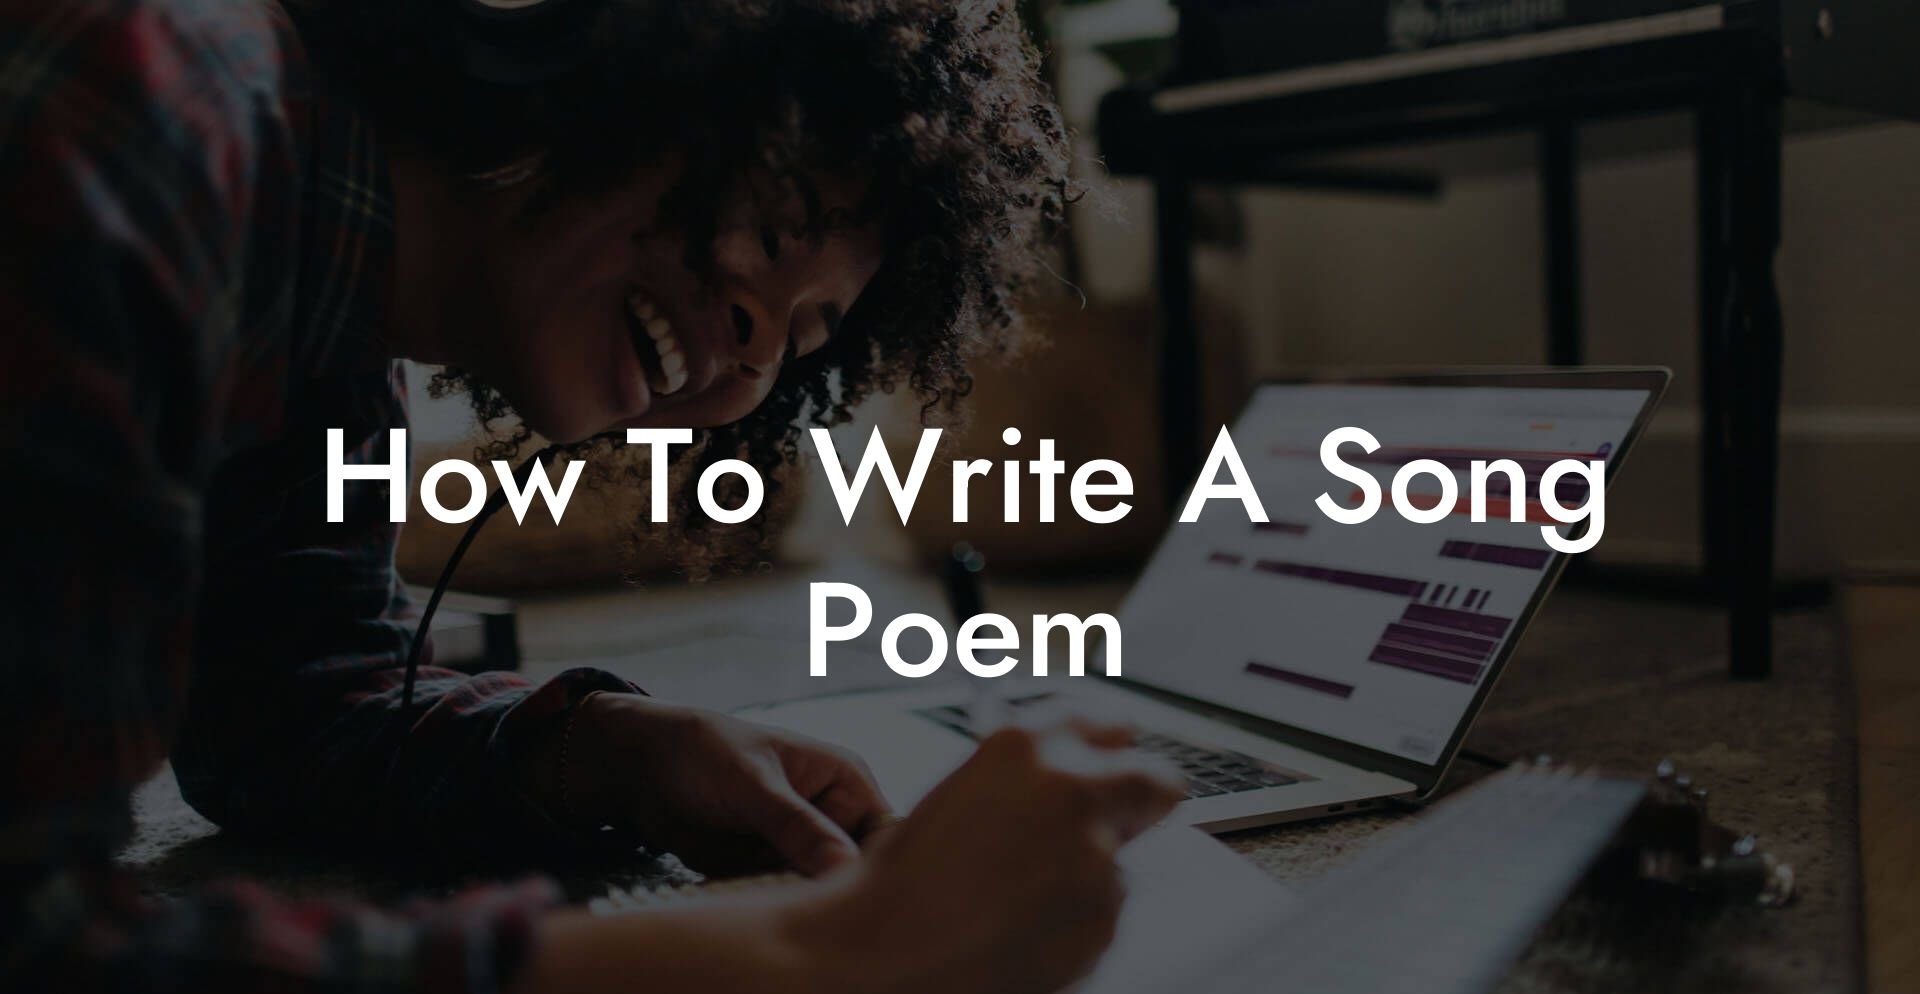 how to write a song poem lyric assistant